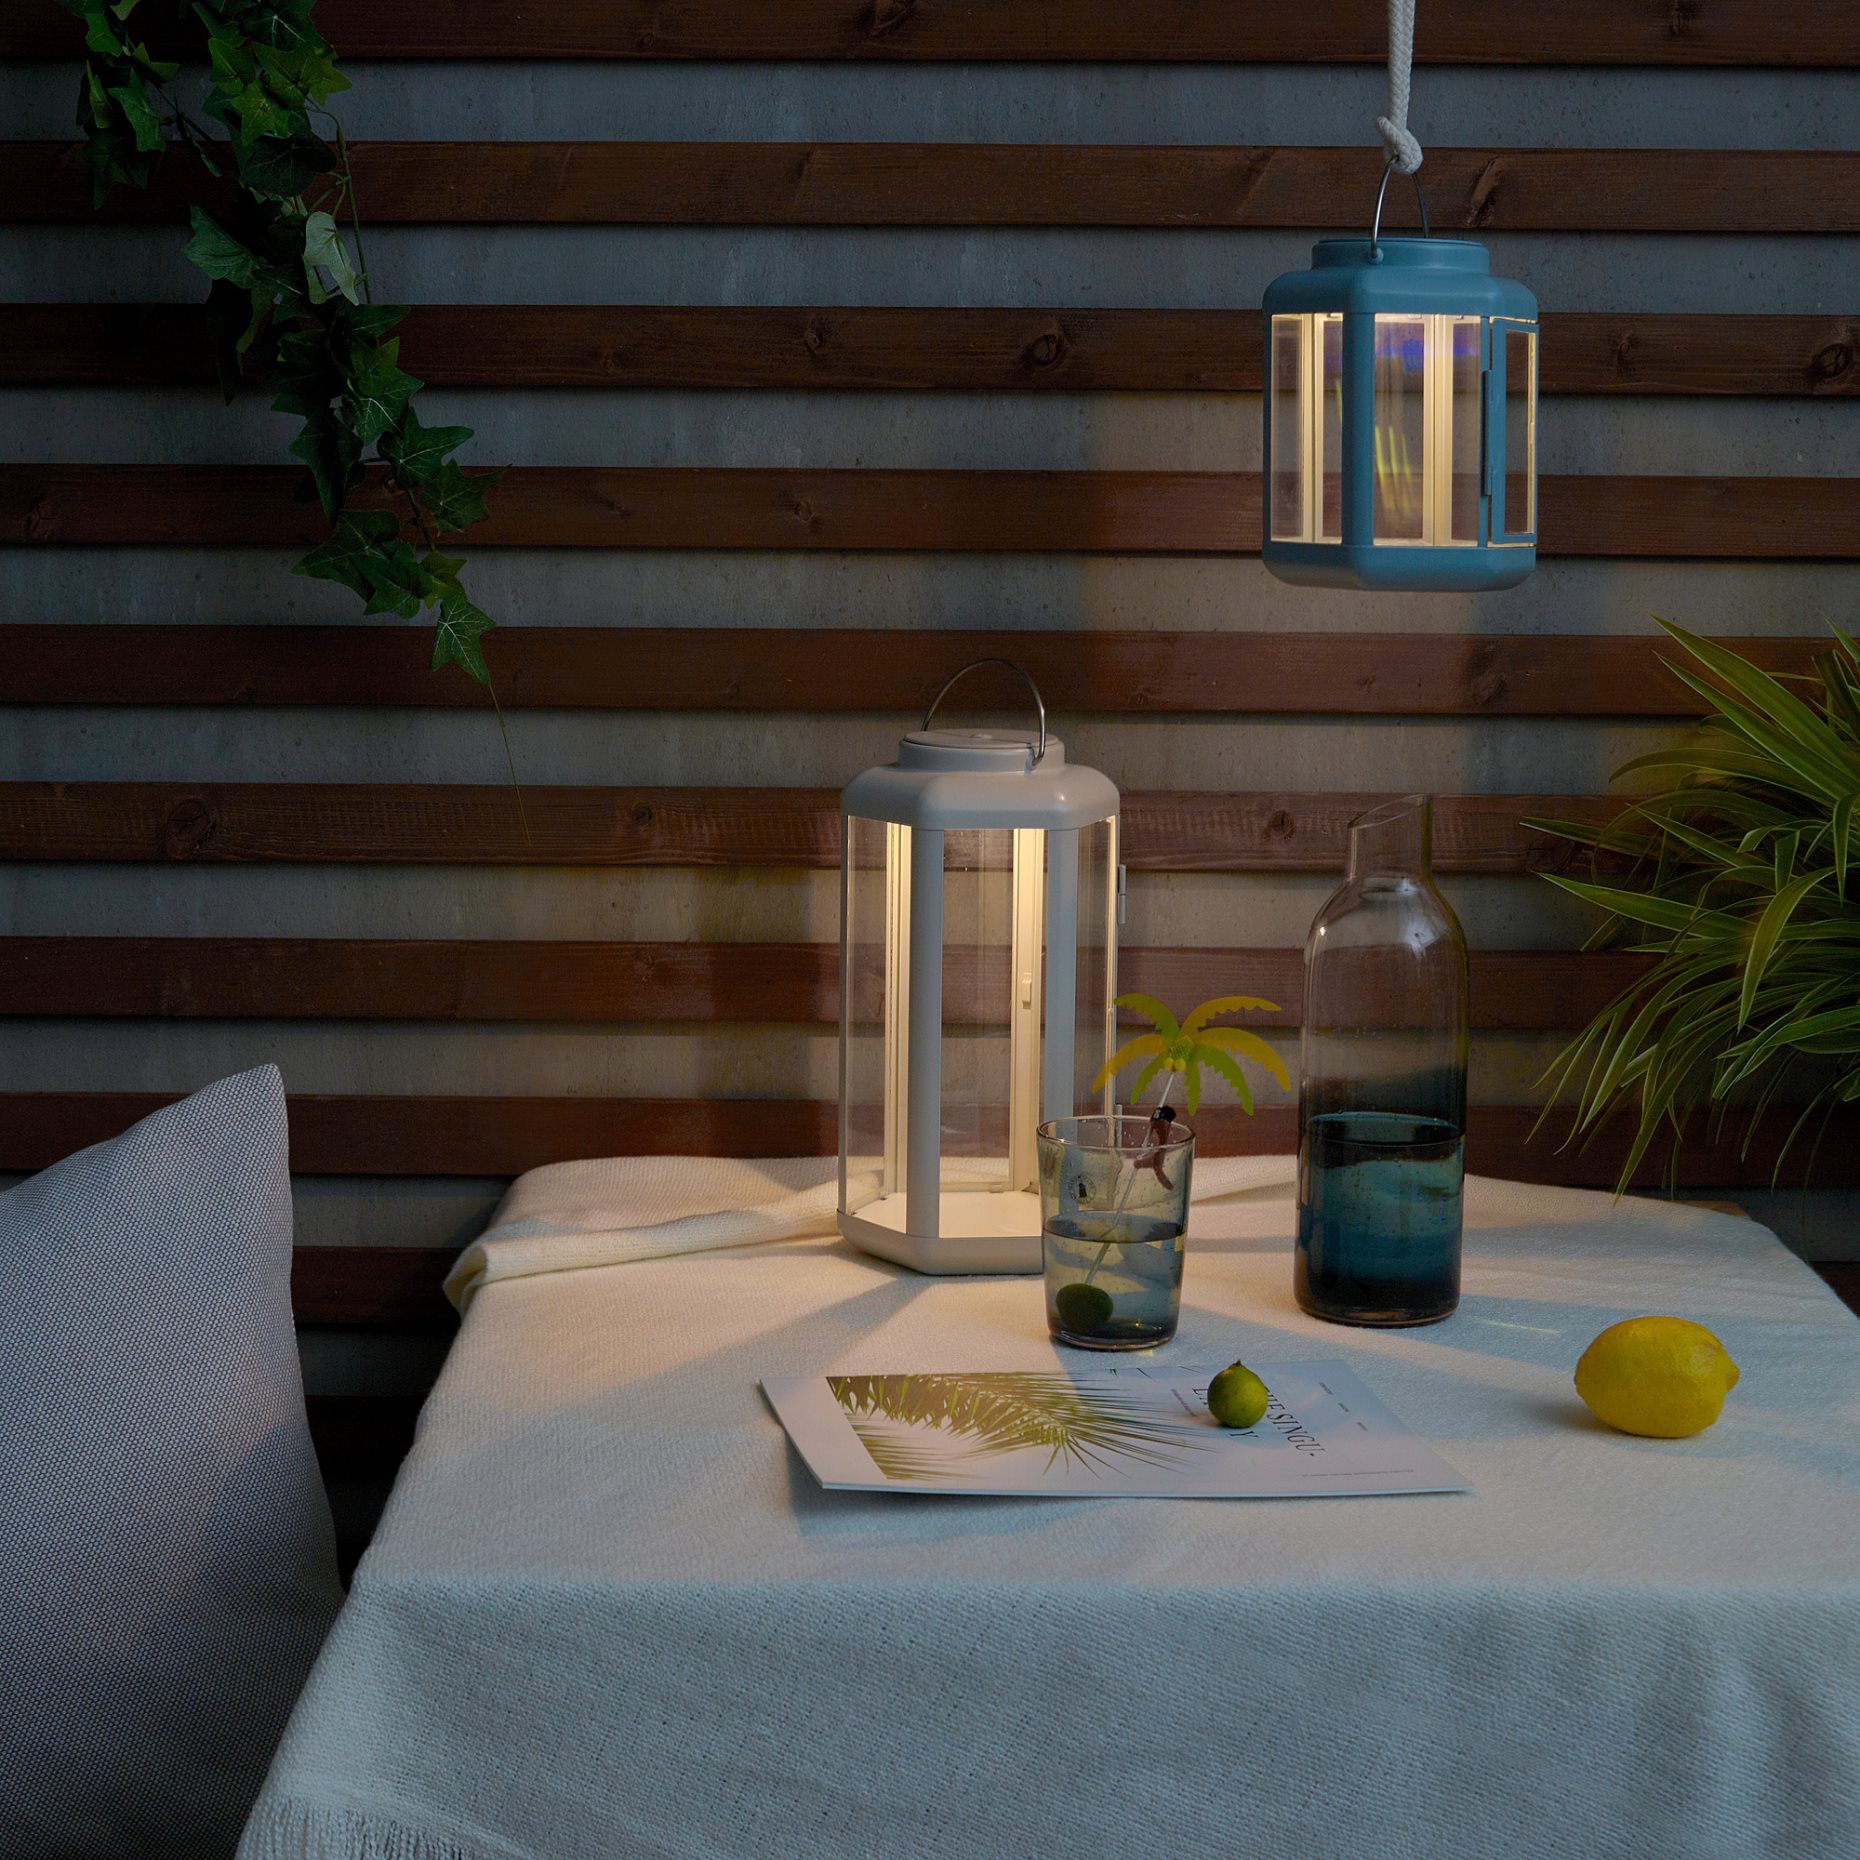 SOMMARLÅNKE, decorative table lamp with built-in LED light source/outdoor/battery-operated/lantern, 28 cm, 805.439.46